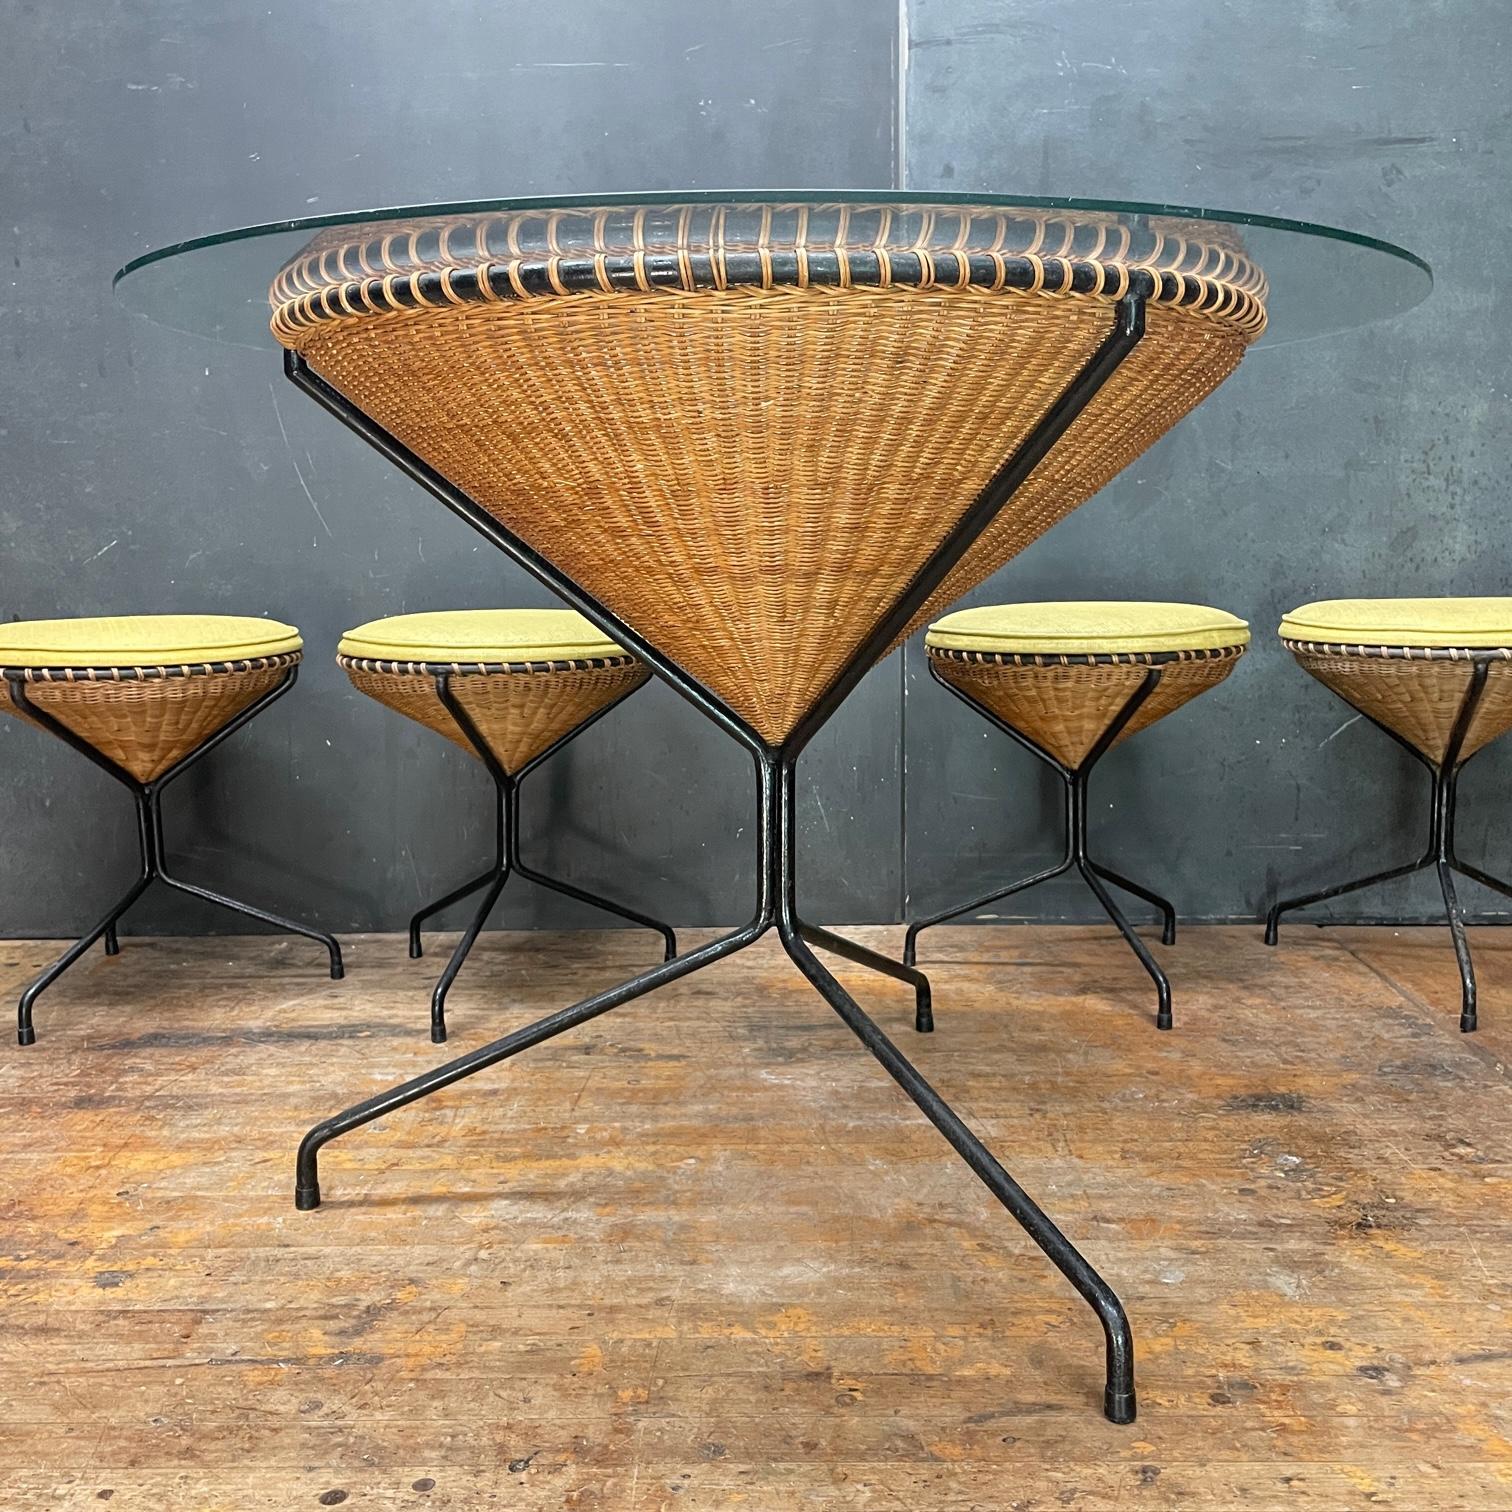 1950s Danny Ho Fong Cafe Set Rare Southern California Design Vintage Modern In Fair Condition For Sale In Hyattsville, MD